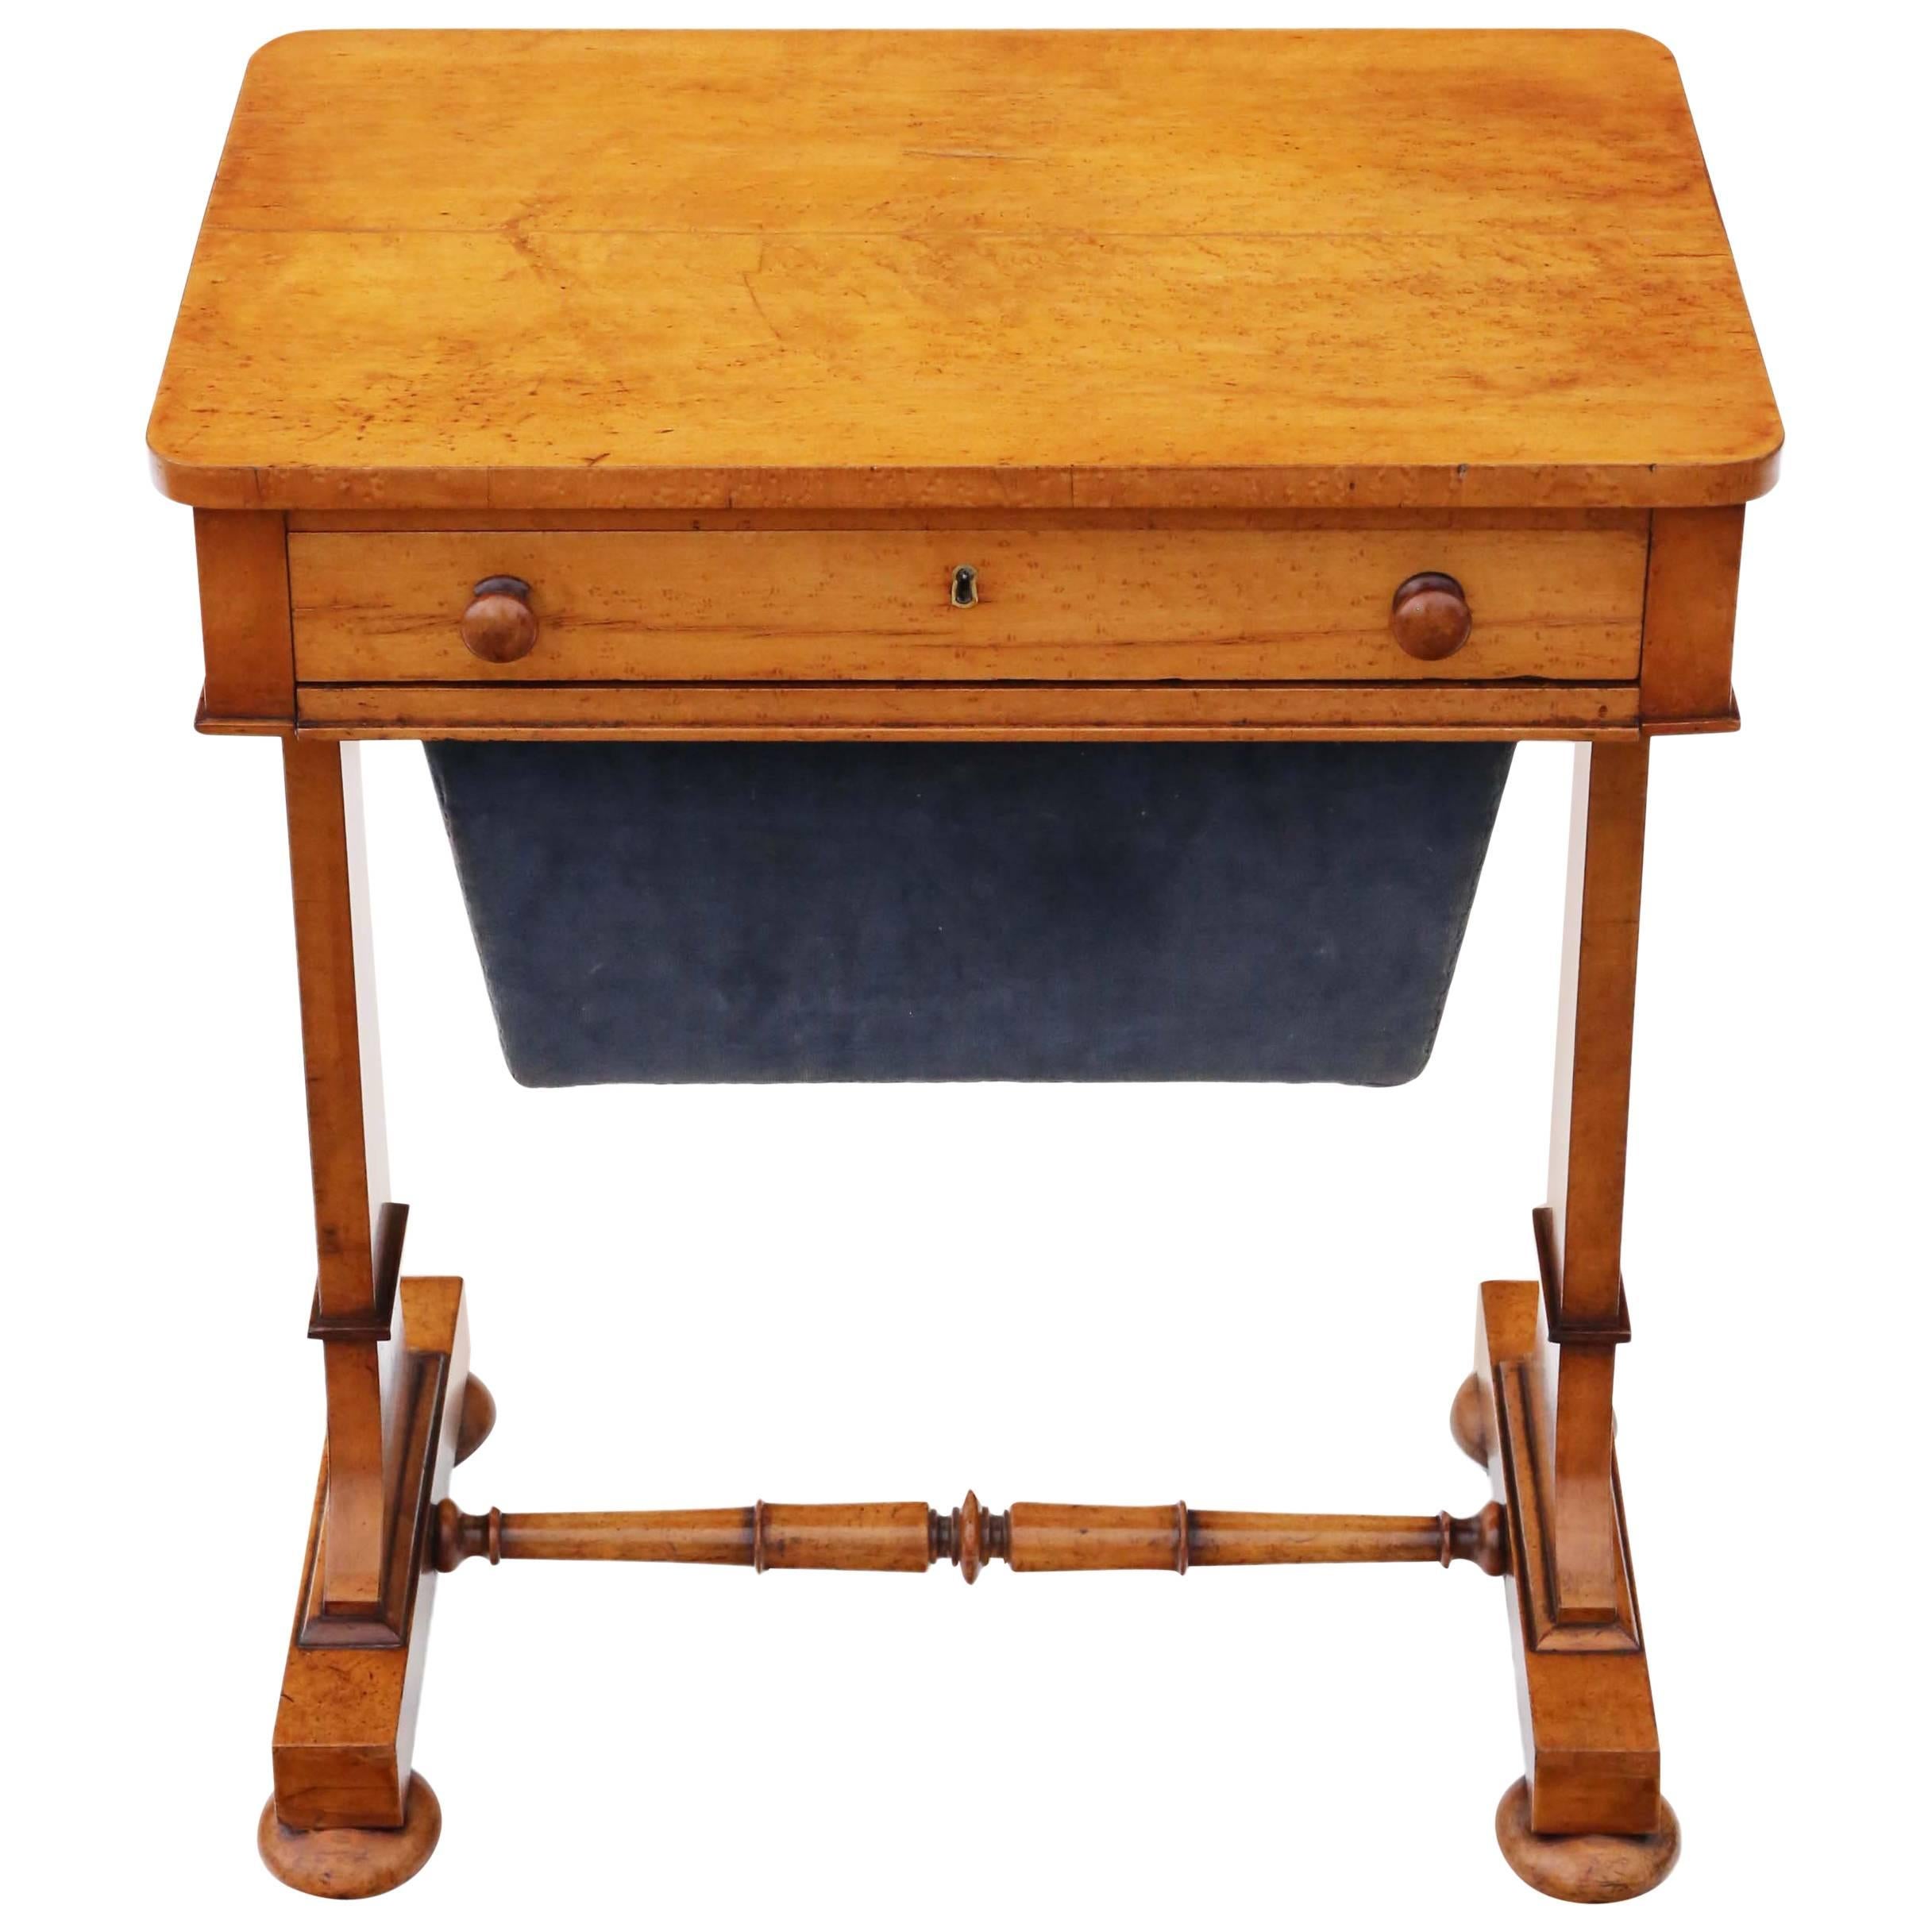 Antique William iv circa 1835 Bird's-Eye Maple Work / Sewing Box or Table For Sale